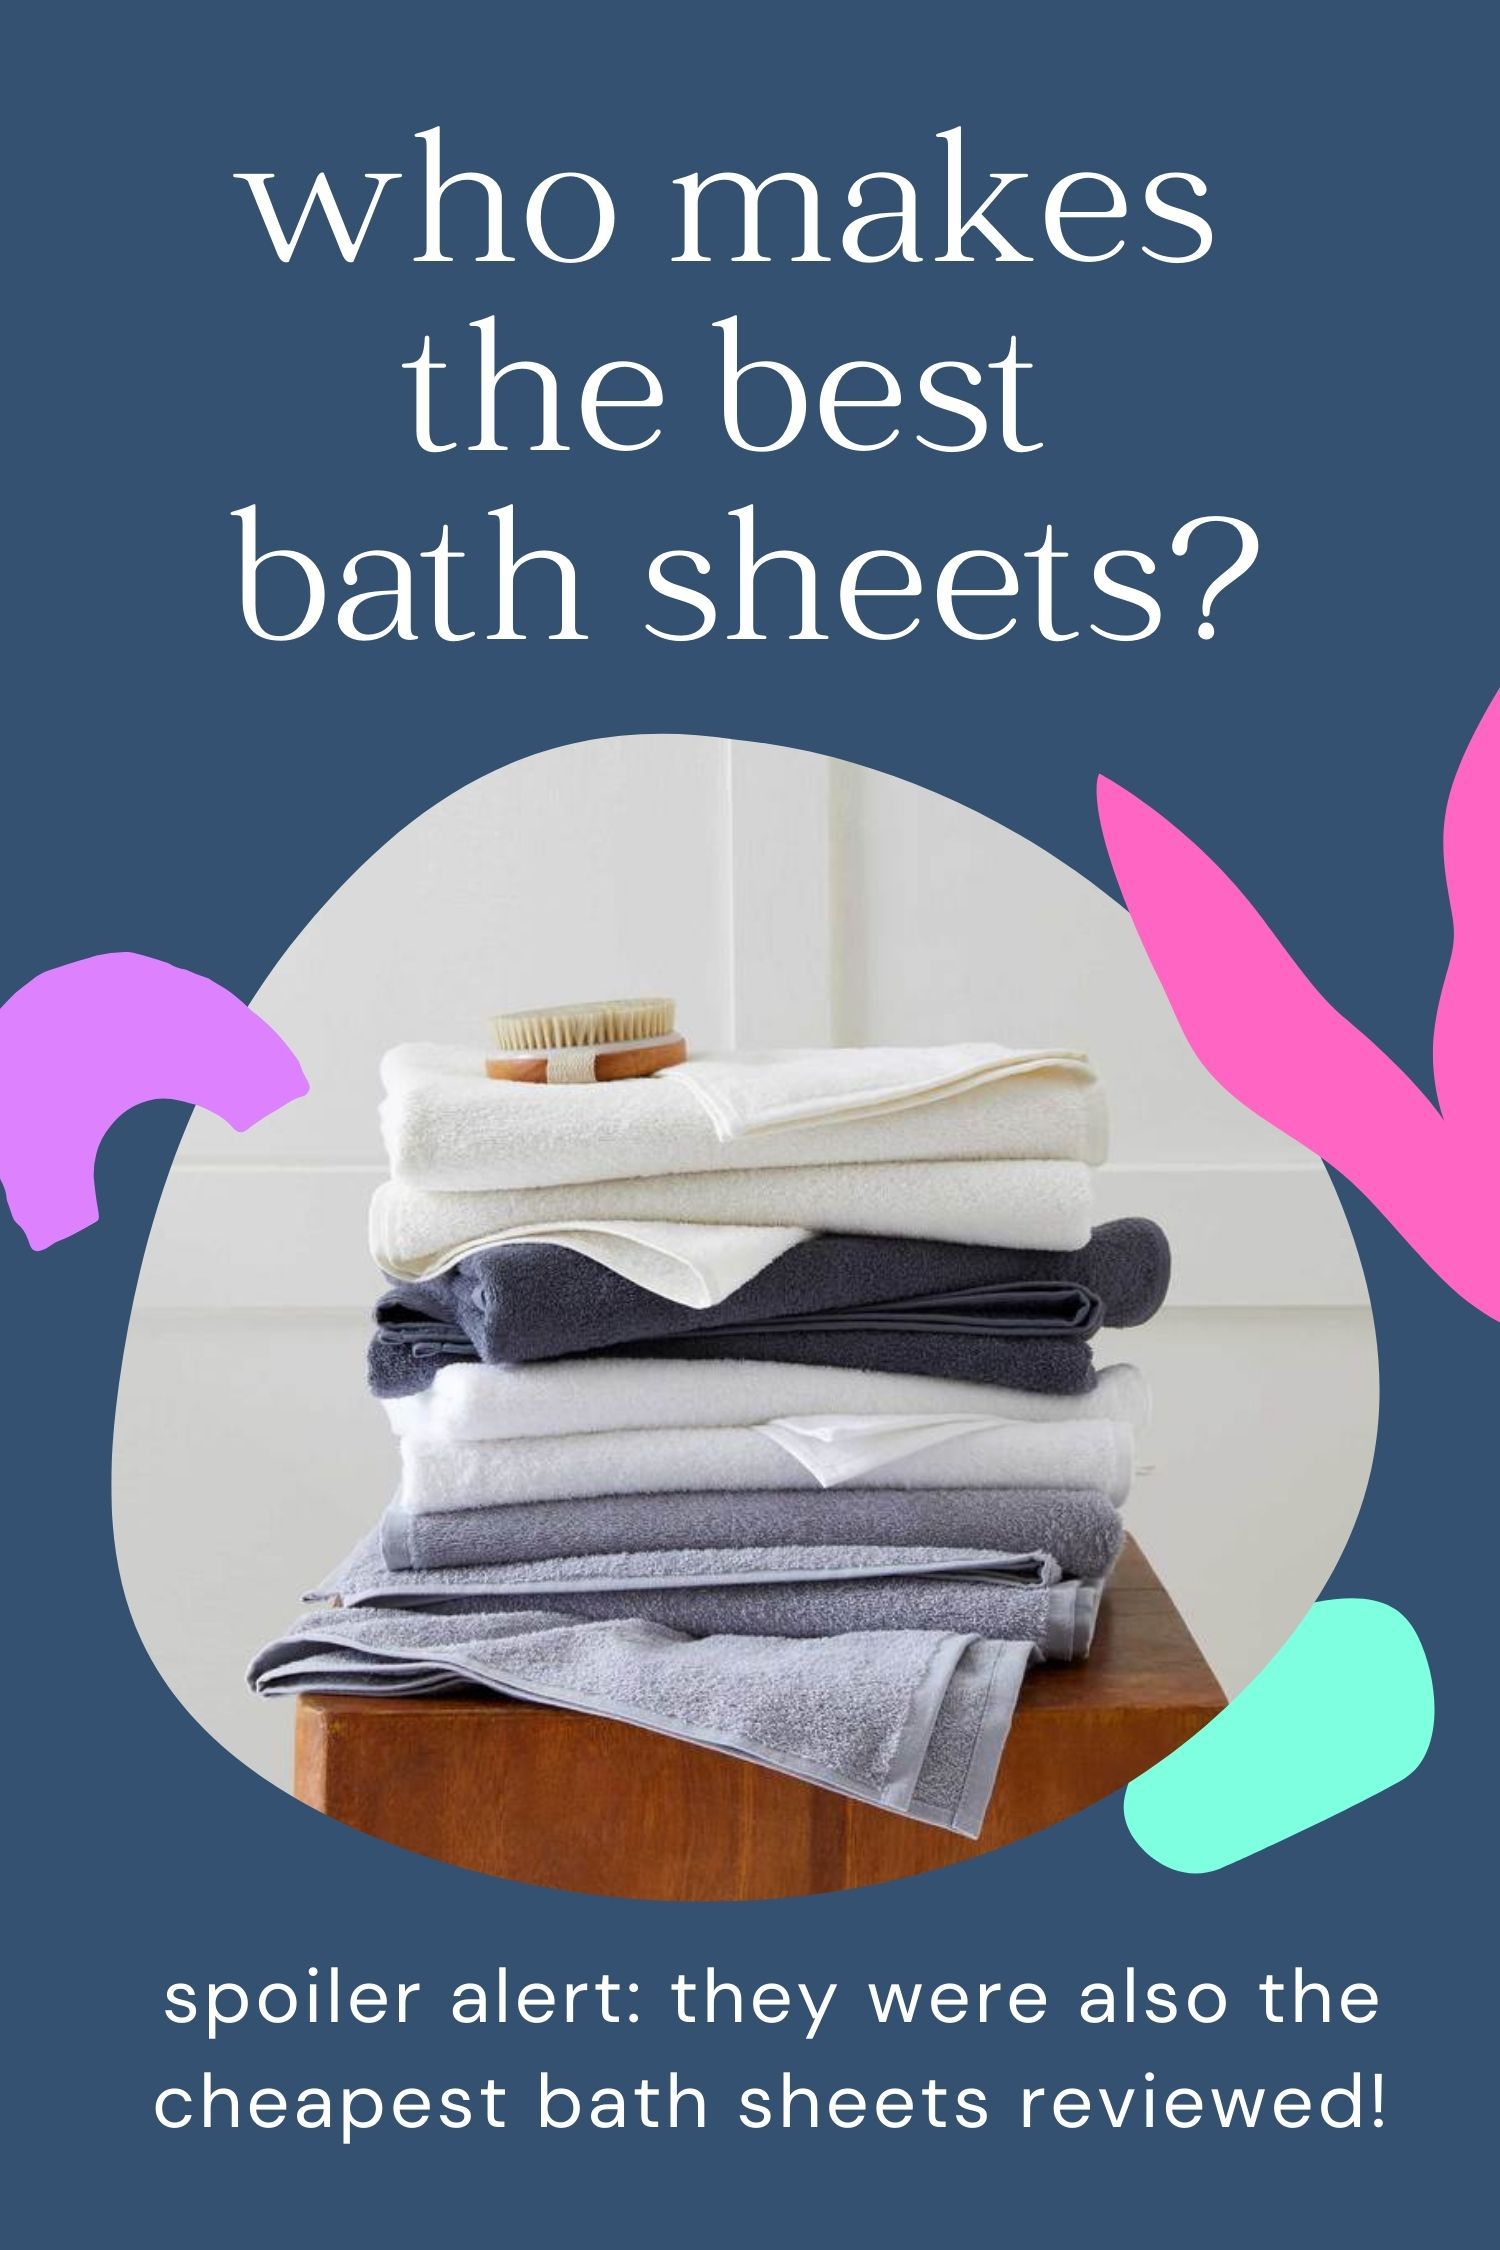 Who Makes the Best Bath Sheet?